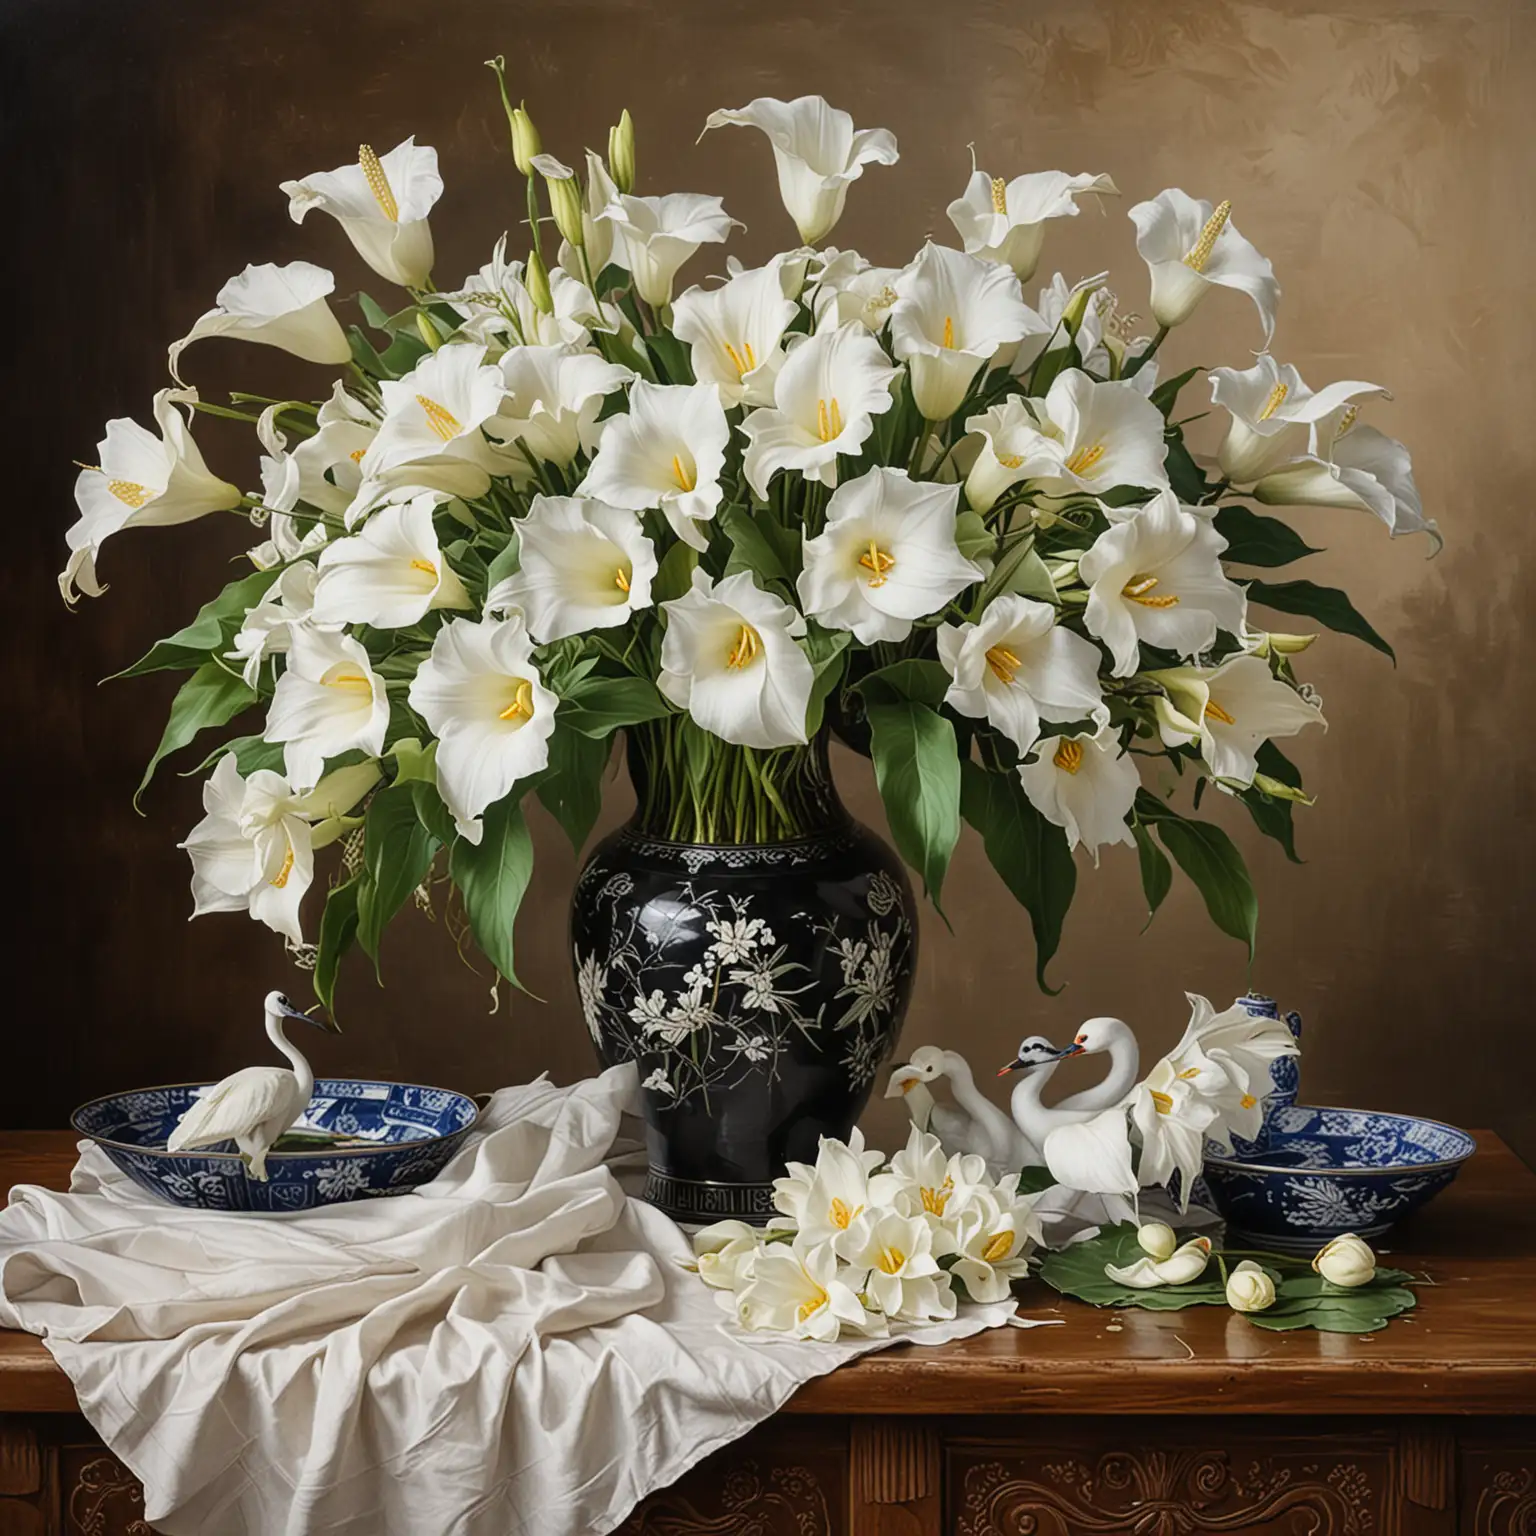 A STILL LIFE PAINTING, WITH A BLACK ORIENTAL VASE, DECORATED WITH WHITE CRANES BIRDS,  AND WATER LILIES, VASE CONYAINING  VERY LARGE  WHITE CALLA  LILIES .  SHOW A FOLDED NAPKIN OR CLOTH ON THE  TABLE 